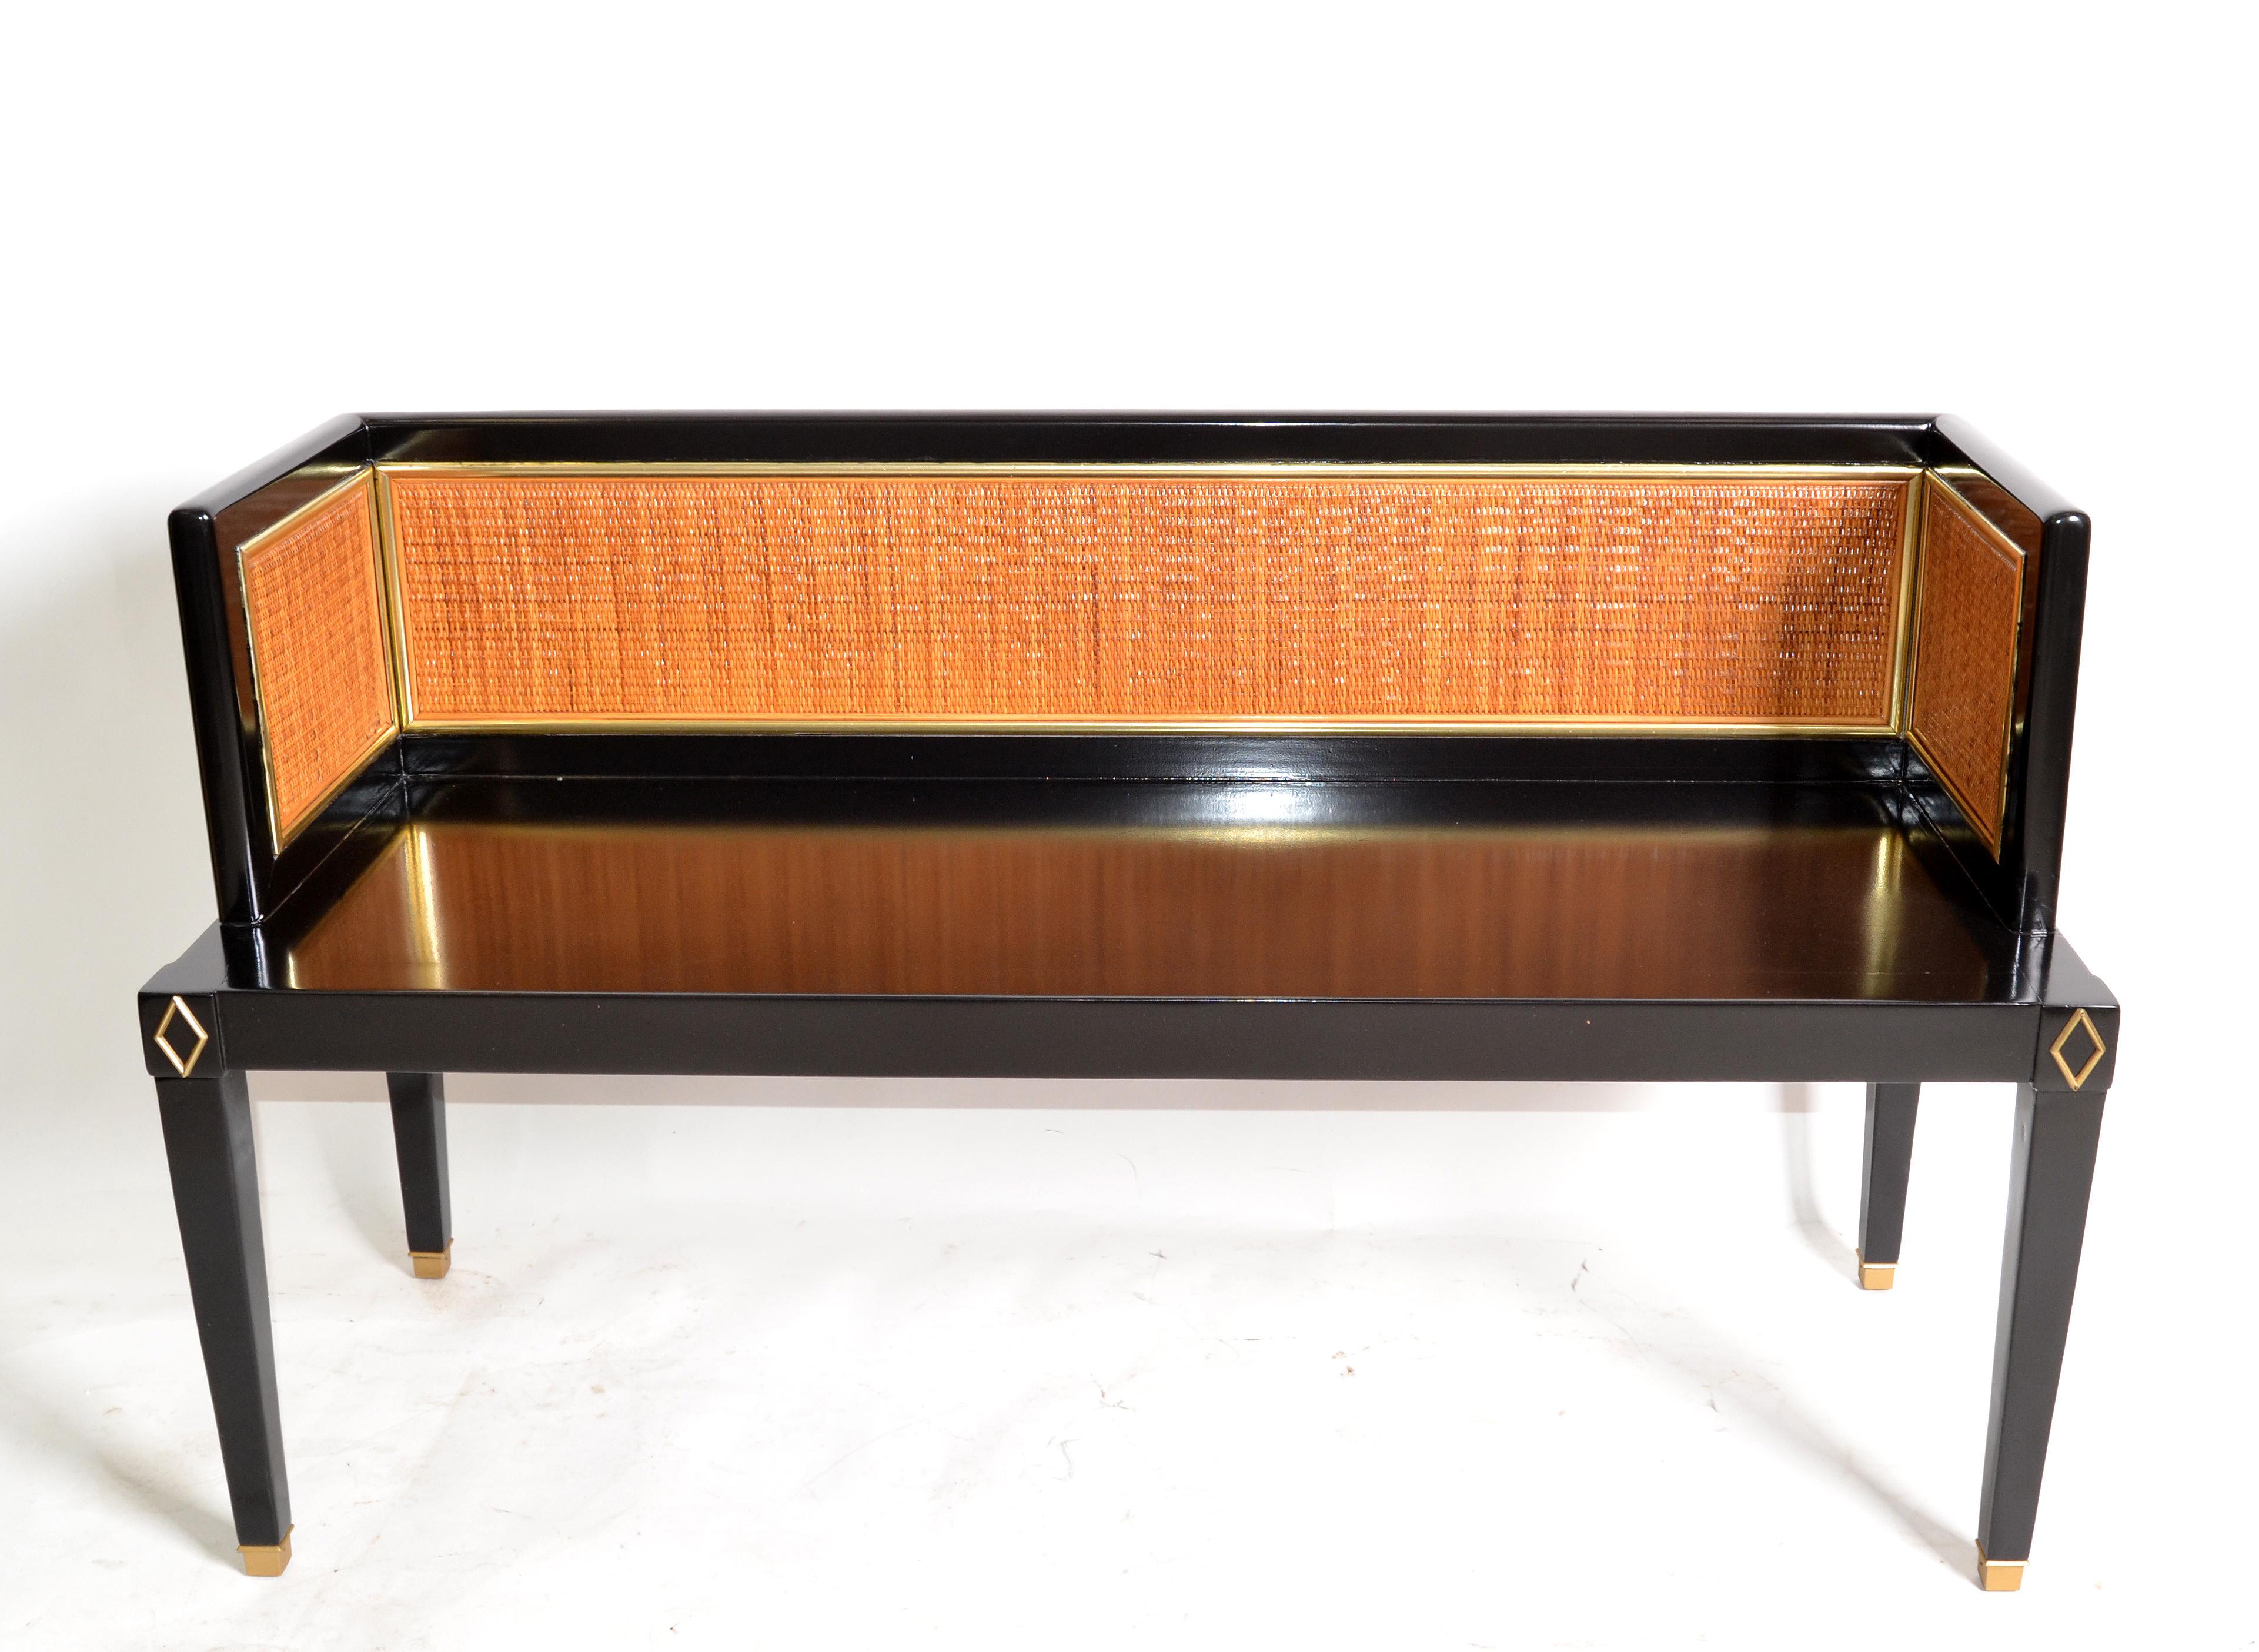 Black Lacquered Wood, Brass & Cane Seating Bench Mid-Century Modern Asian Style For Sale 8